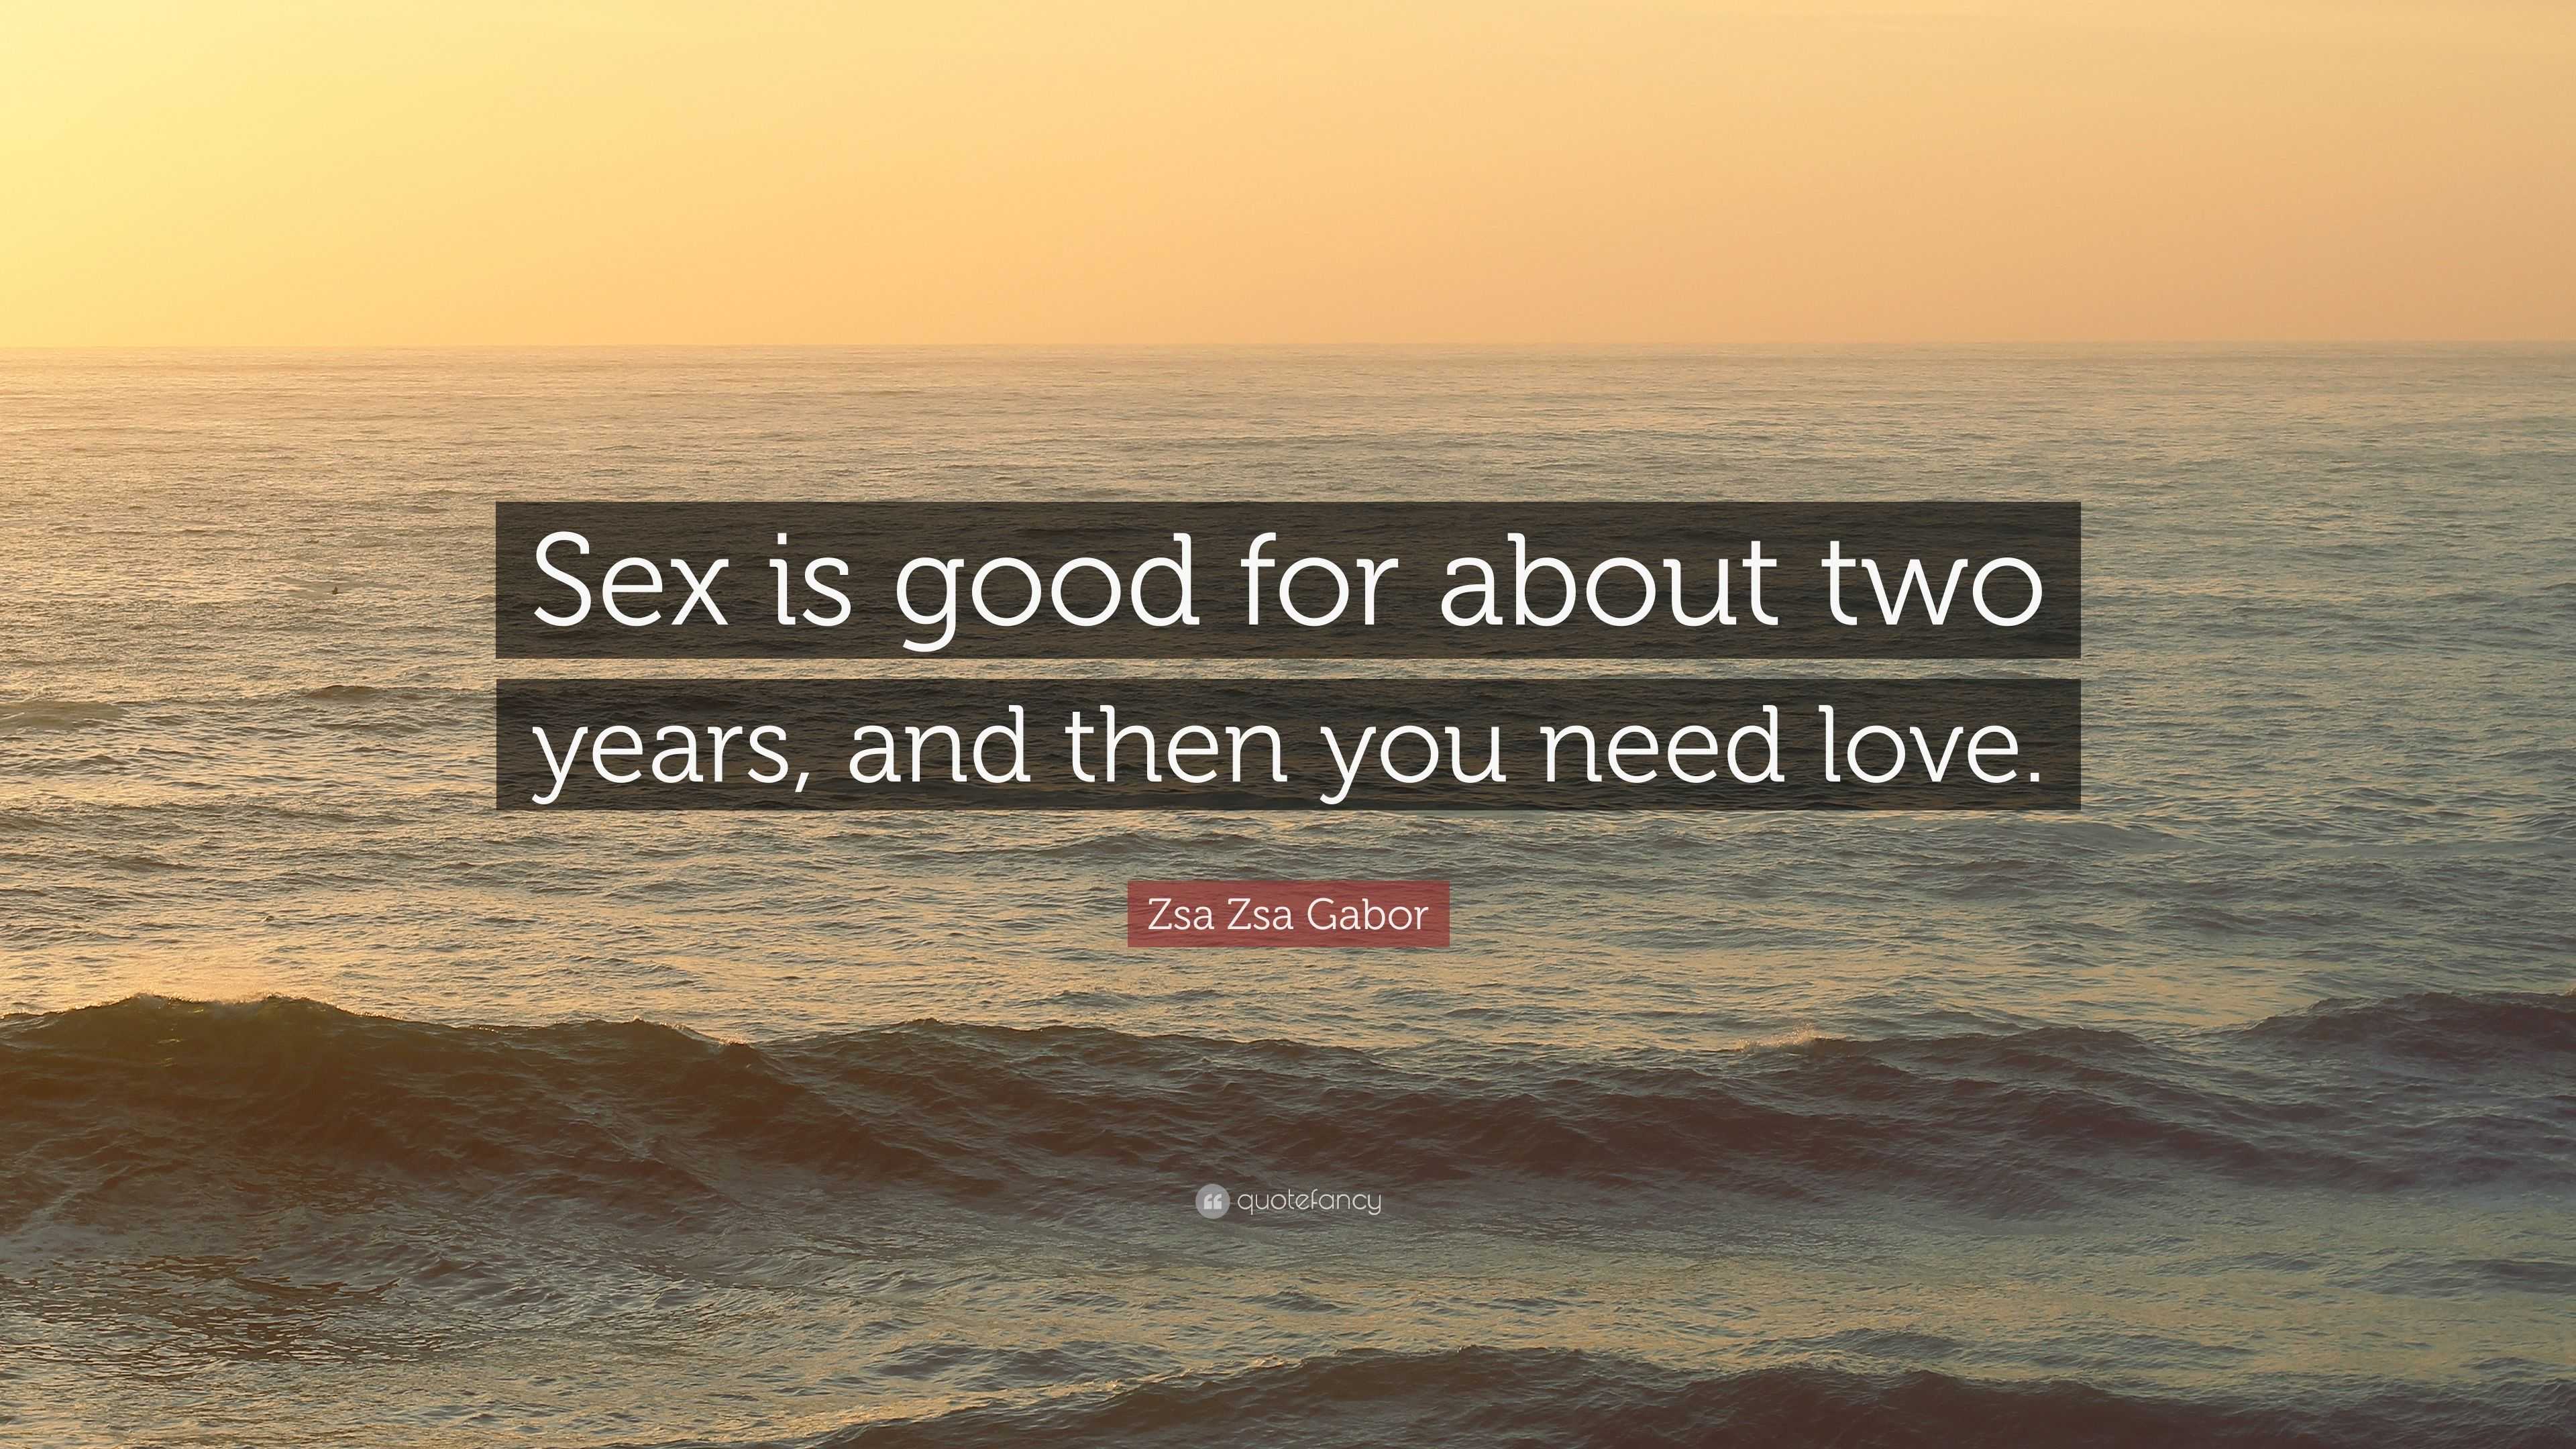 Zsa Zsa Gabor Quote “sex Is Good For About Two Years And Then You Need Love” 3272